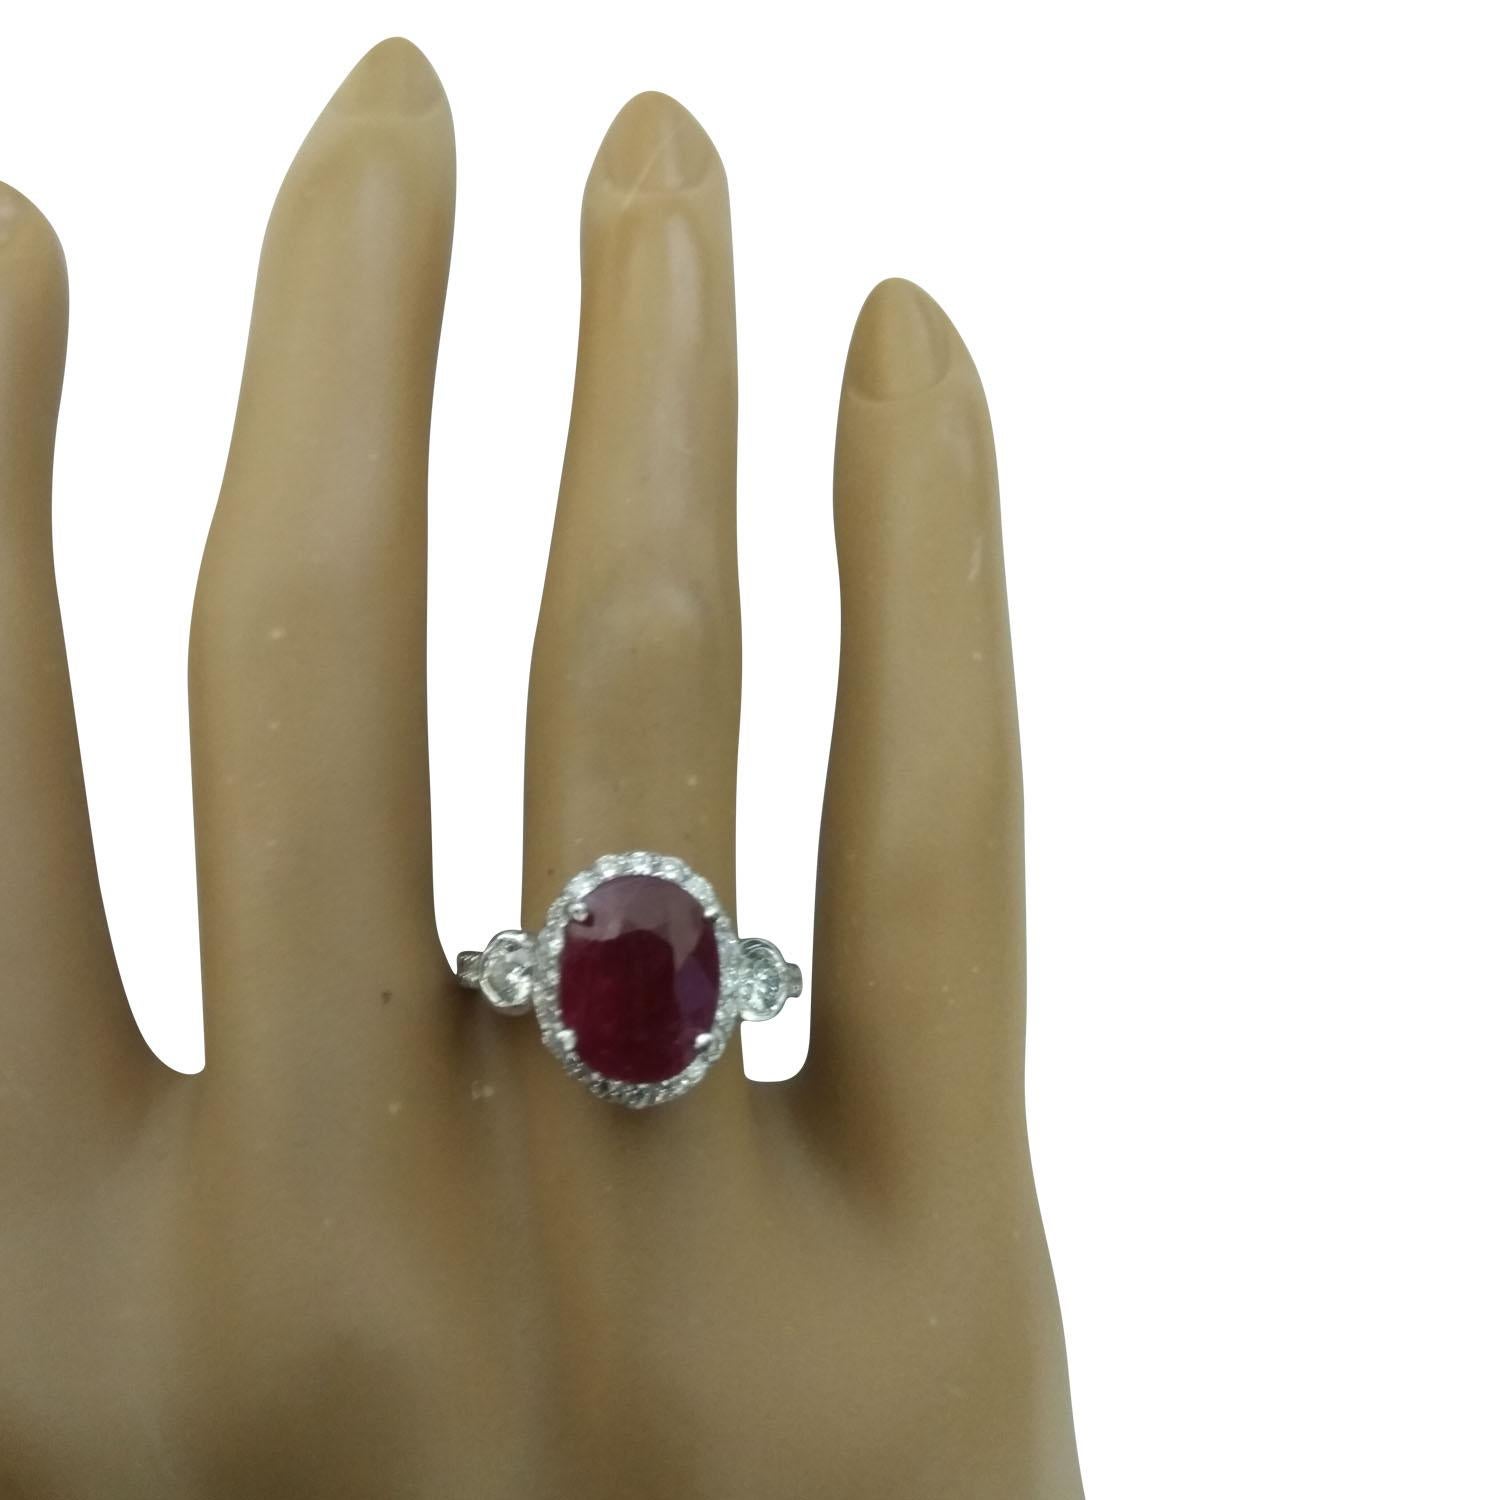 3.00 Carat Natural Ruby 14 Karat Solid White Gold Diamond Ring
Stamped: 14K 
Total Ring Weight: 3.6 Grams 
Ruby Weight 2.25 Carat (10.00x8.00 Millimeters)
Diamond Weight: 0.75 carat (F-G Color, VS2-SI1 Clarity)
Face Measures: 12.85x10.70 Millimeter